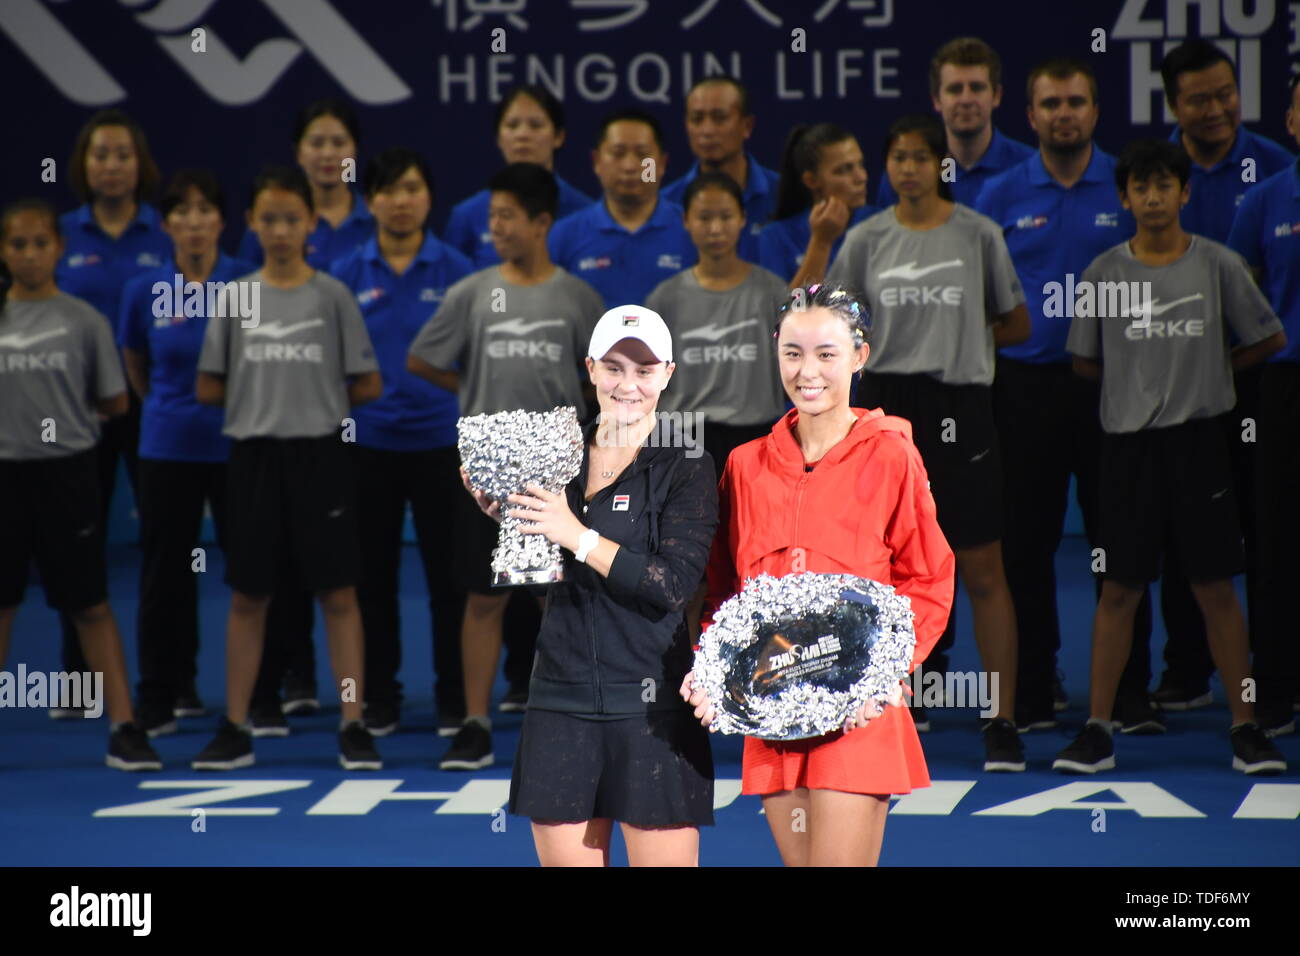 2018 Zhuhai Super Classic Wang Qiang lost to runner-up against Barty, the moment of the game and the awards ceremony Stock Photo